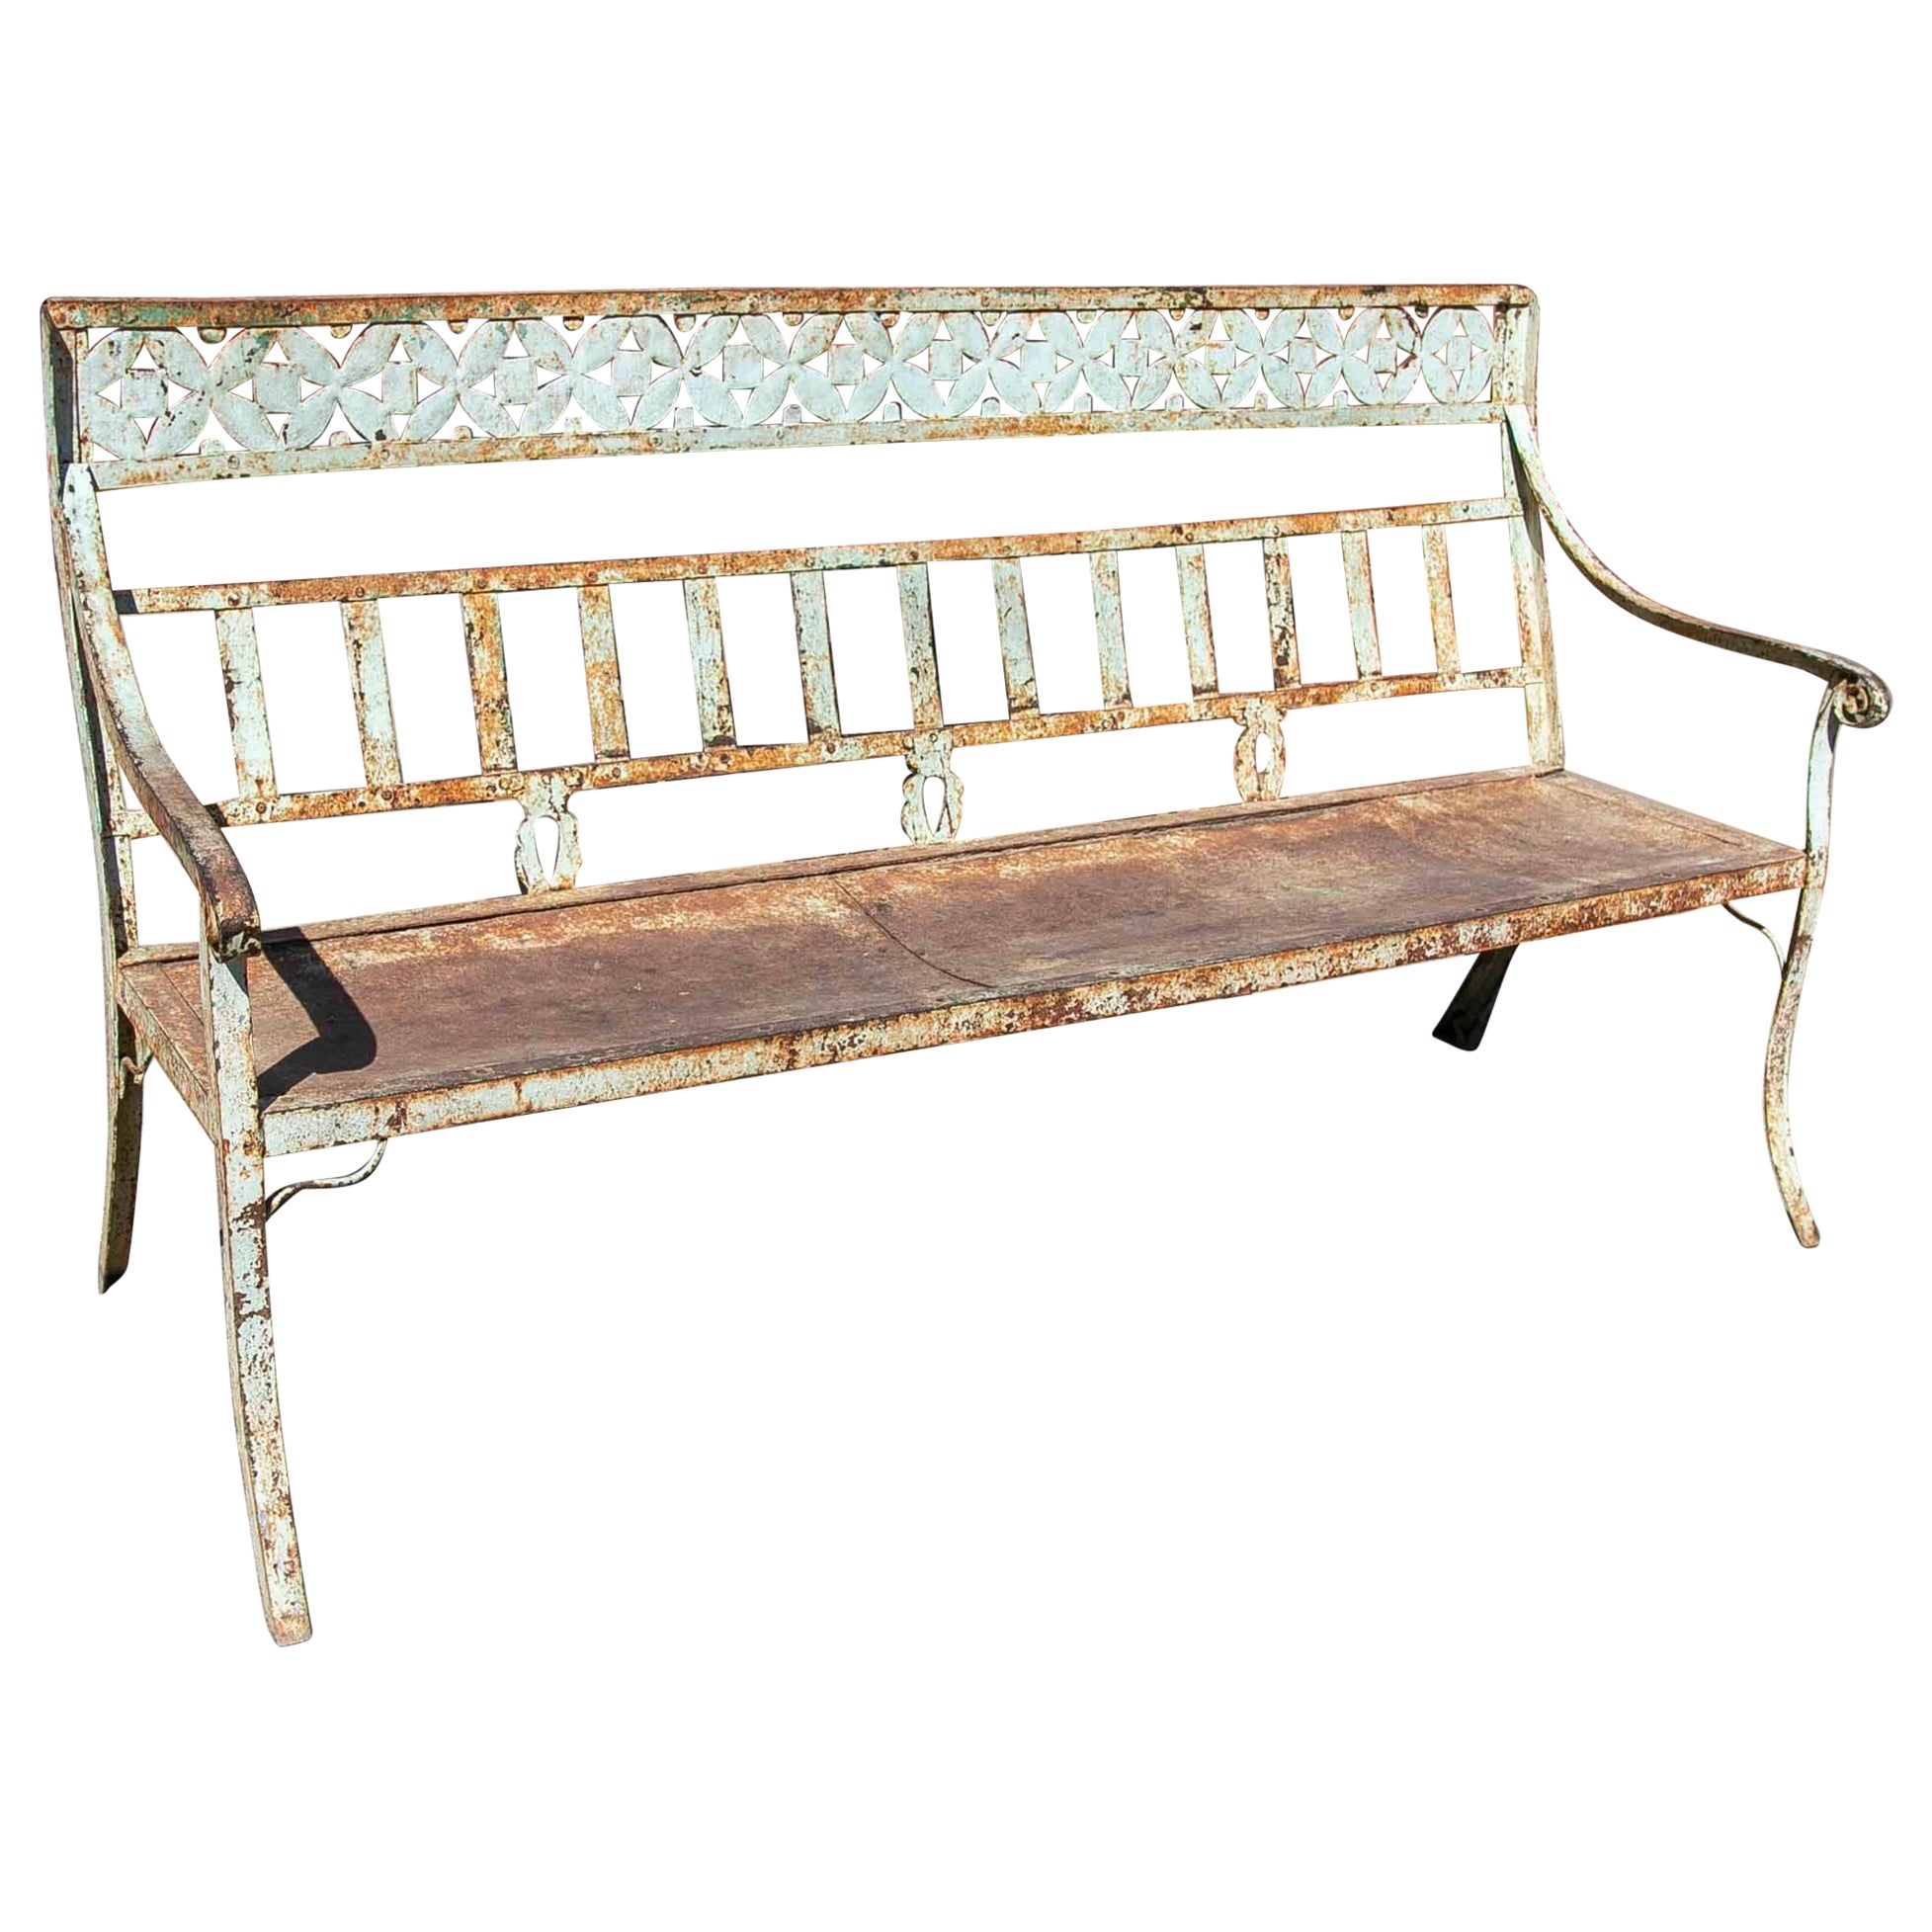 1950s Iron Bench Polychromed with Flowers Decoration